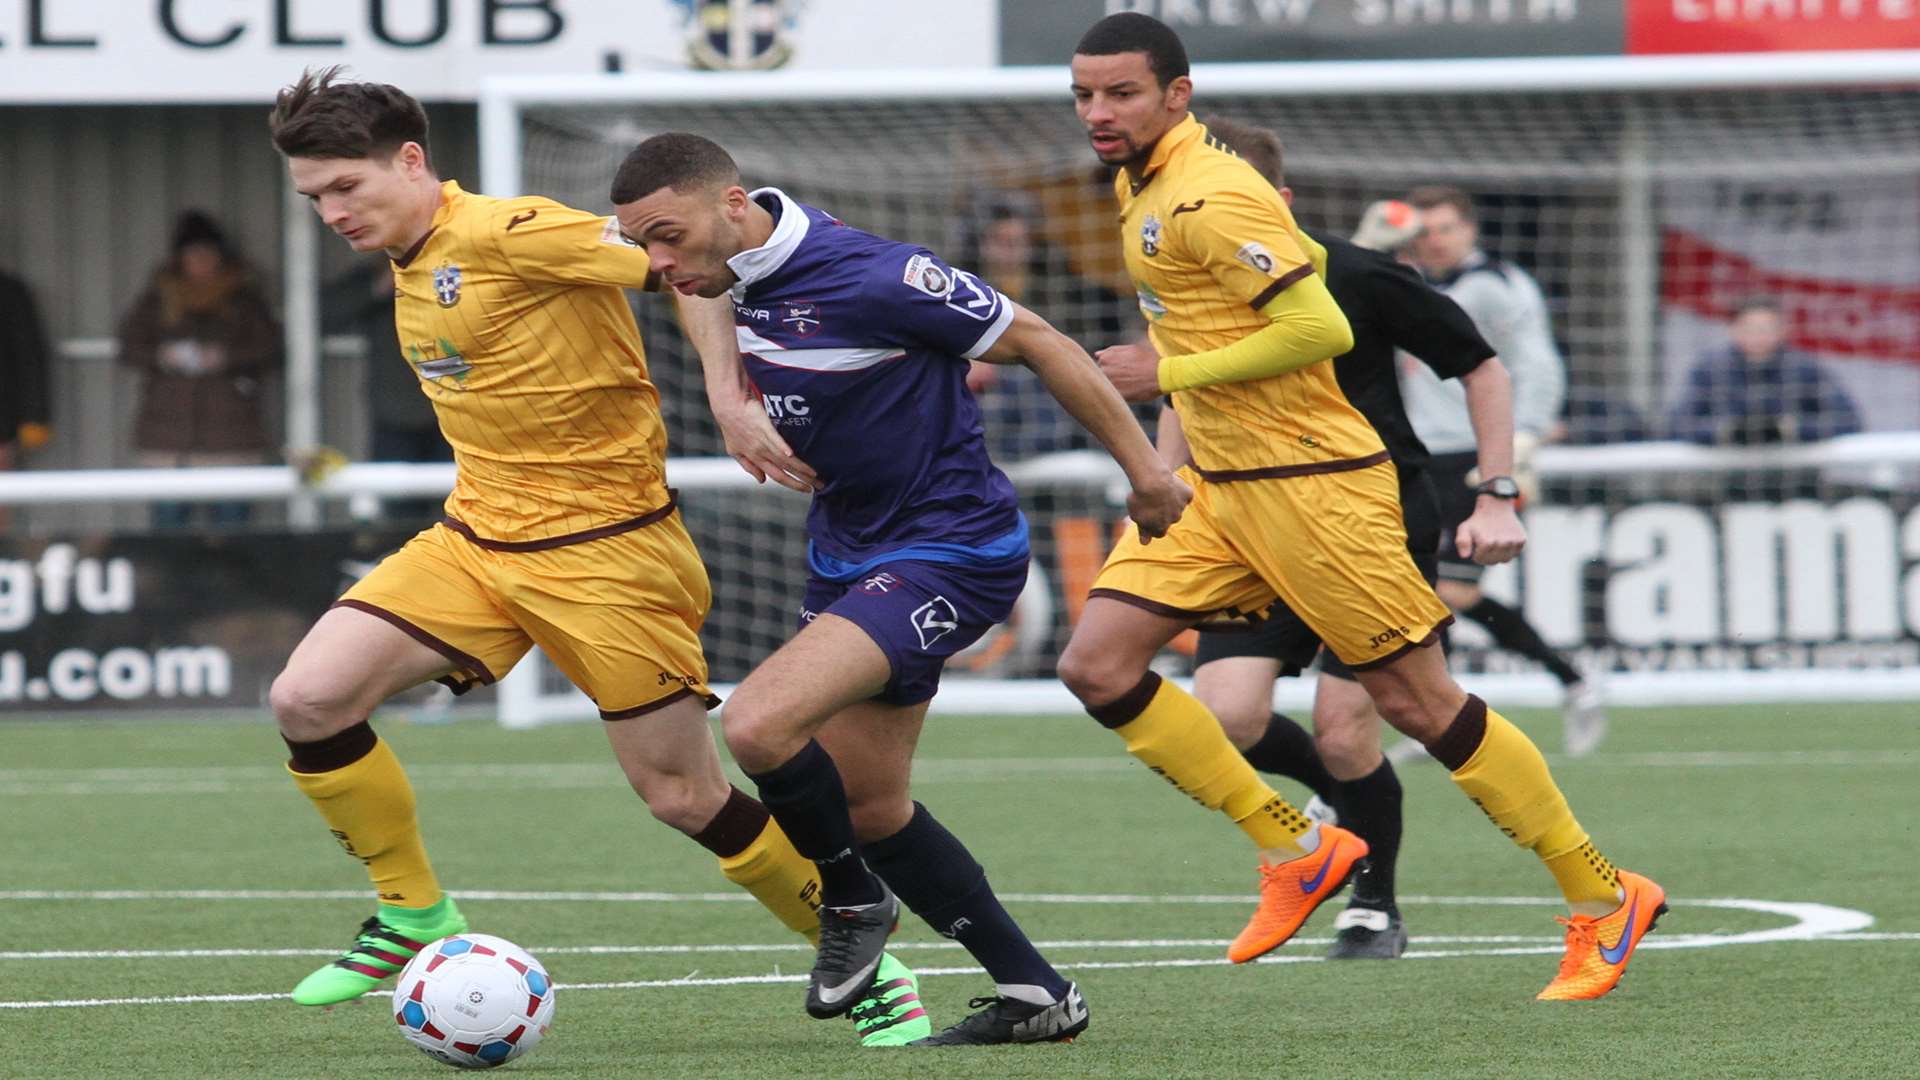 Margate's Christian Jolley takes on the Sutton defence Picture: Don Walker